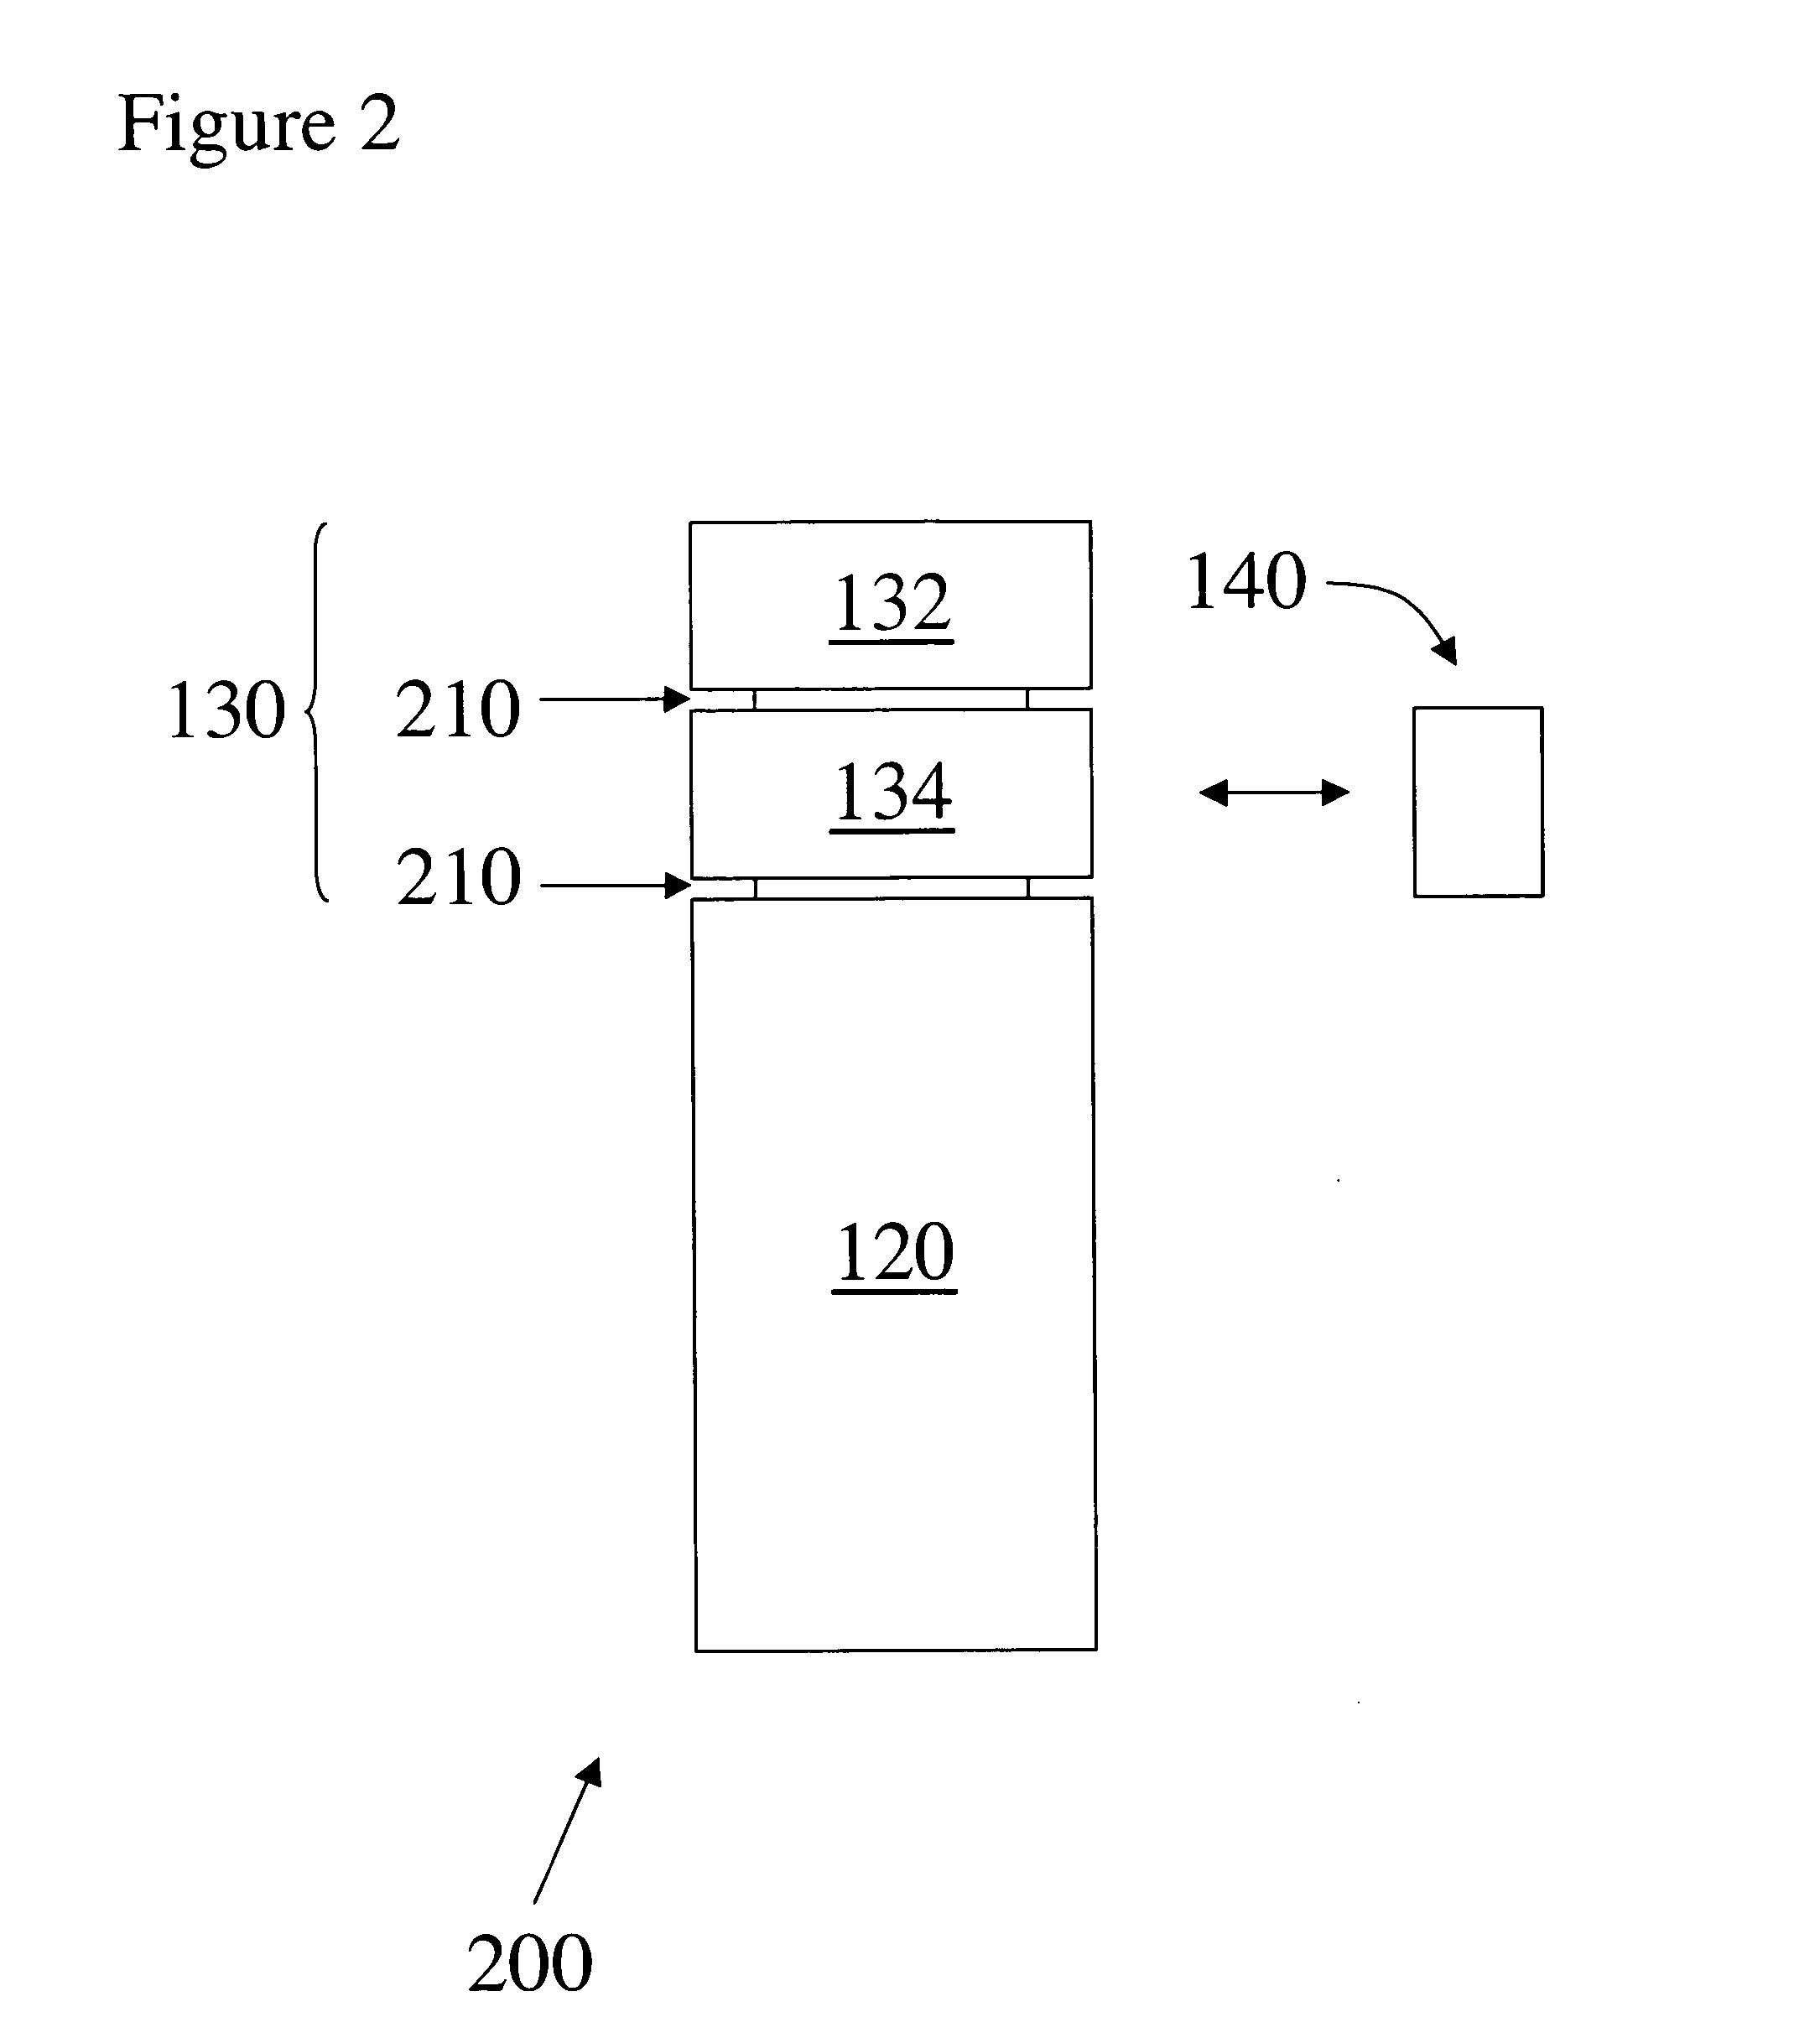 Articles of clothing and personal gear with on-demand power supply for electrical devices